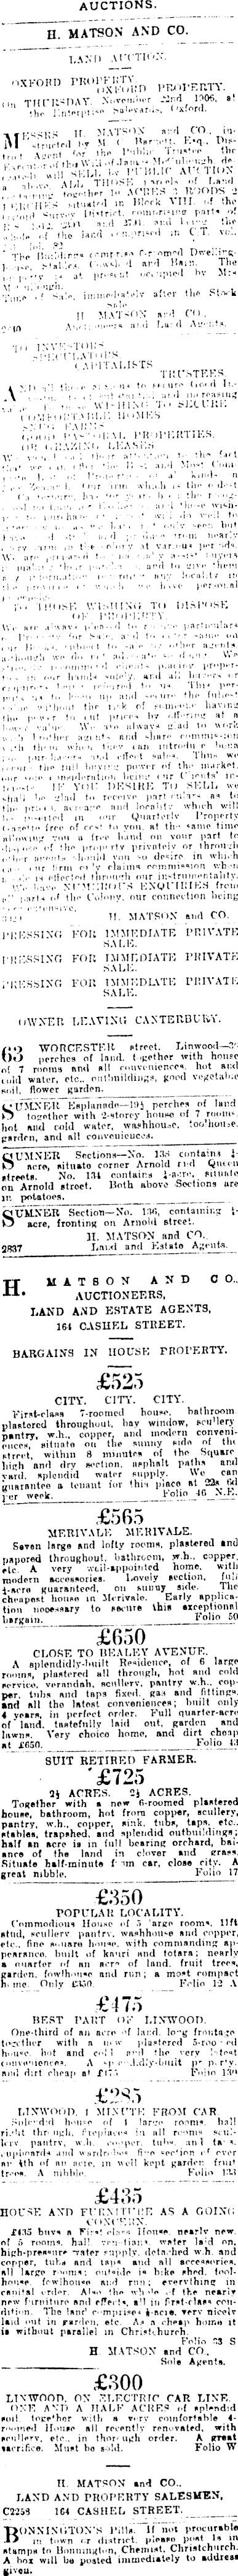 Papers Past Newspapers Press 7 November 1906 Page 12 Advertisements Column 1